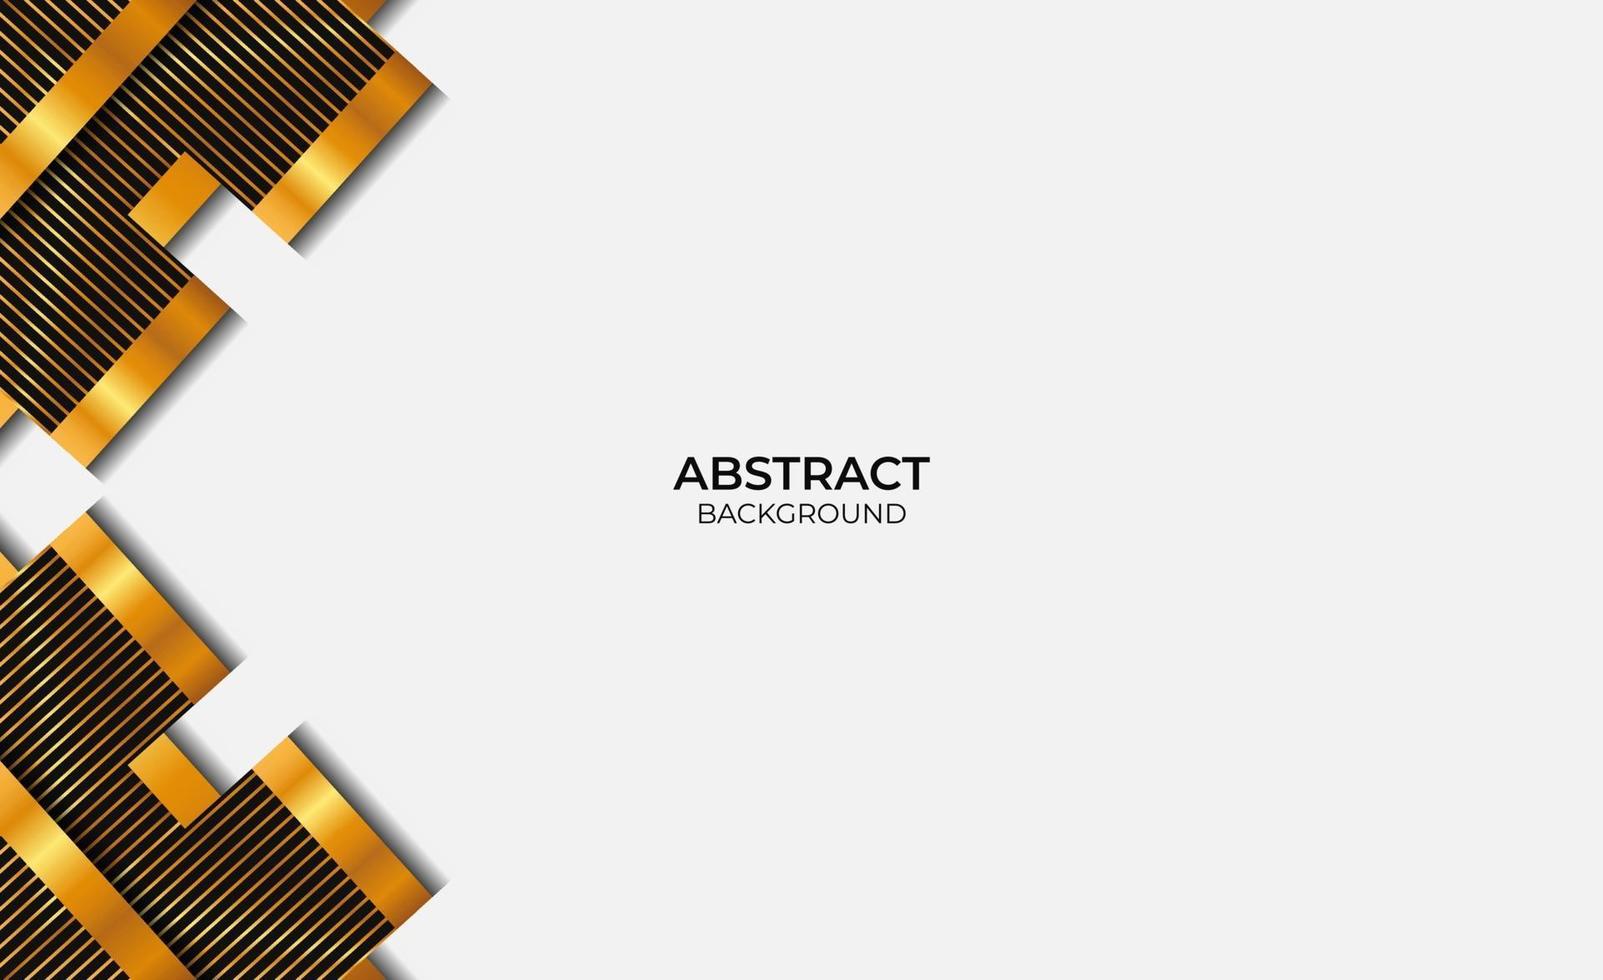 Design Style Black And Gold Abstract vector